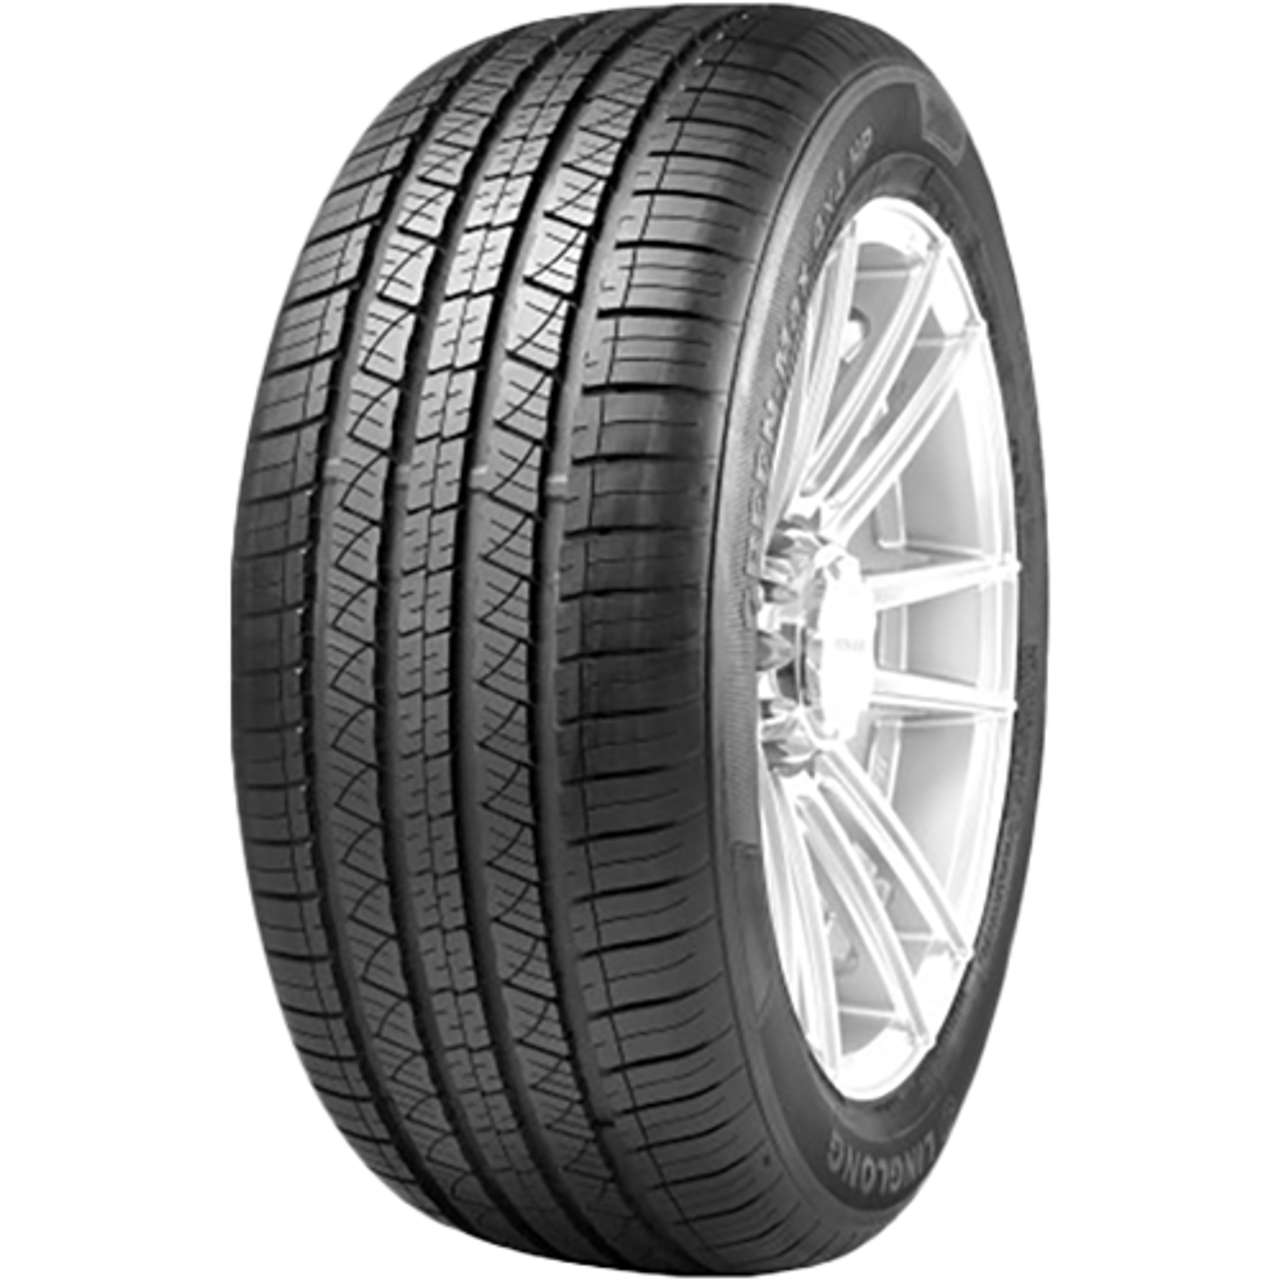 LINGLONG GREEN-MAX 4X4 HP 225/65R17 102H BSW von LINGLONG